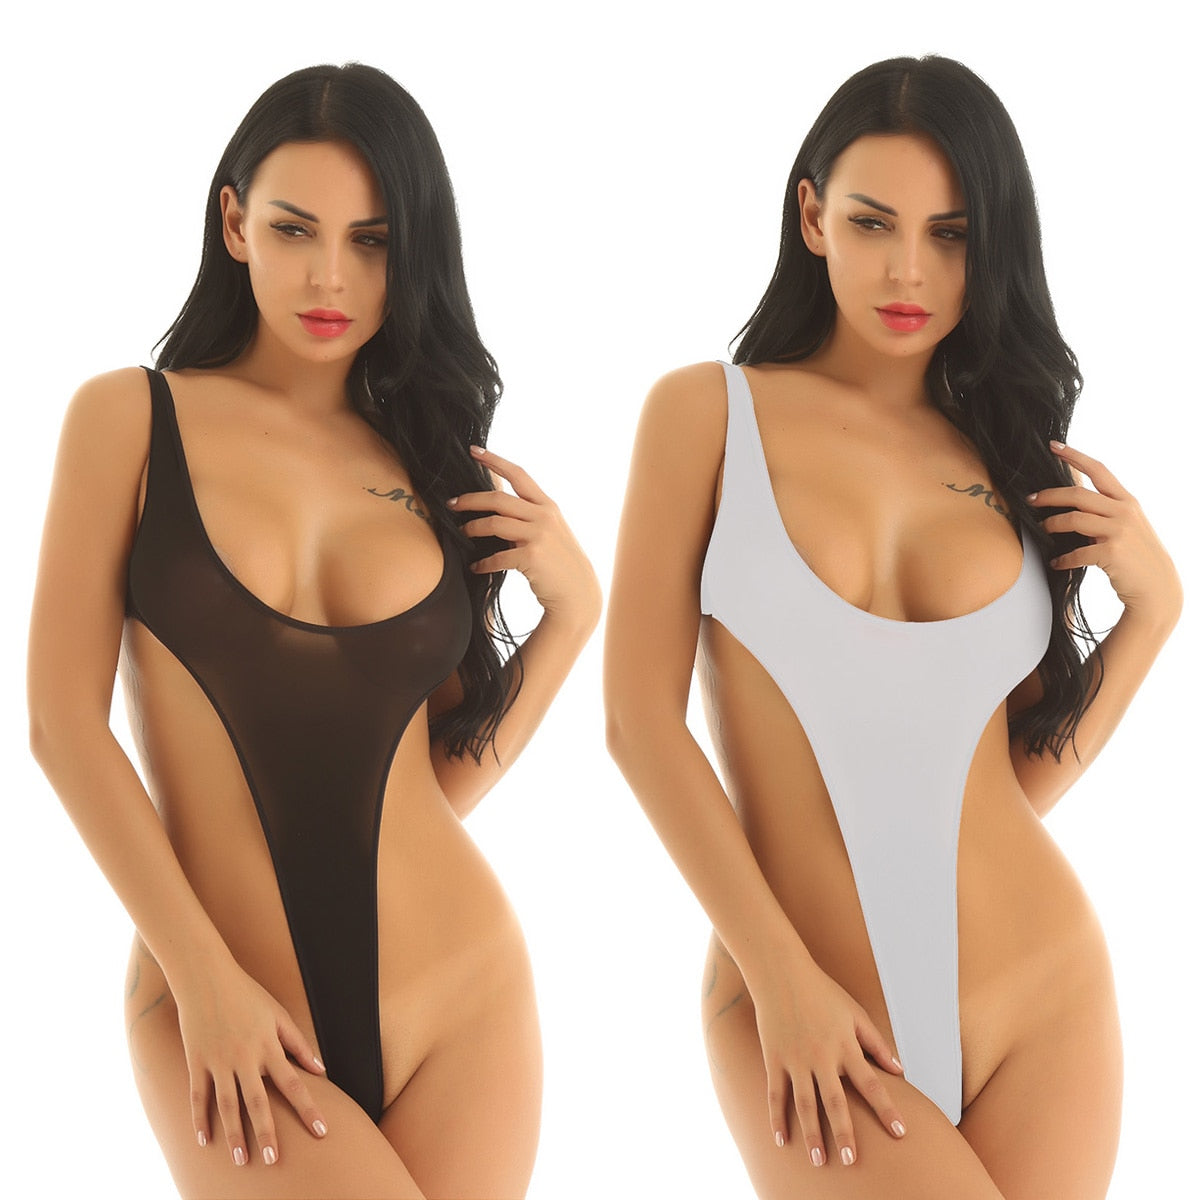 Adults Transparent Swimsuit Fused High Cut Monokini Thong Leotards Bodysuit One Piece Perspective Sheer Lingerie Swimwear The Clothing Company Sydney